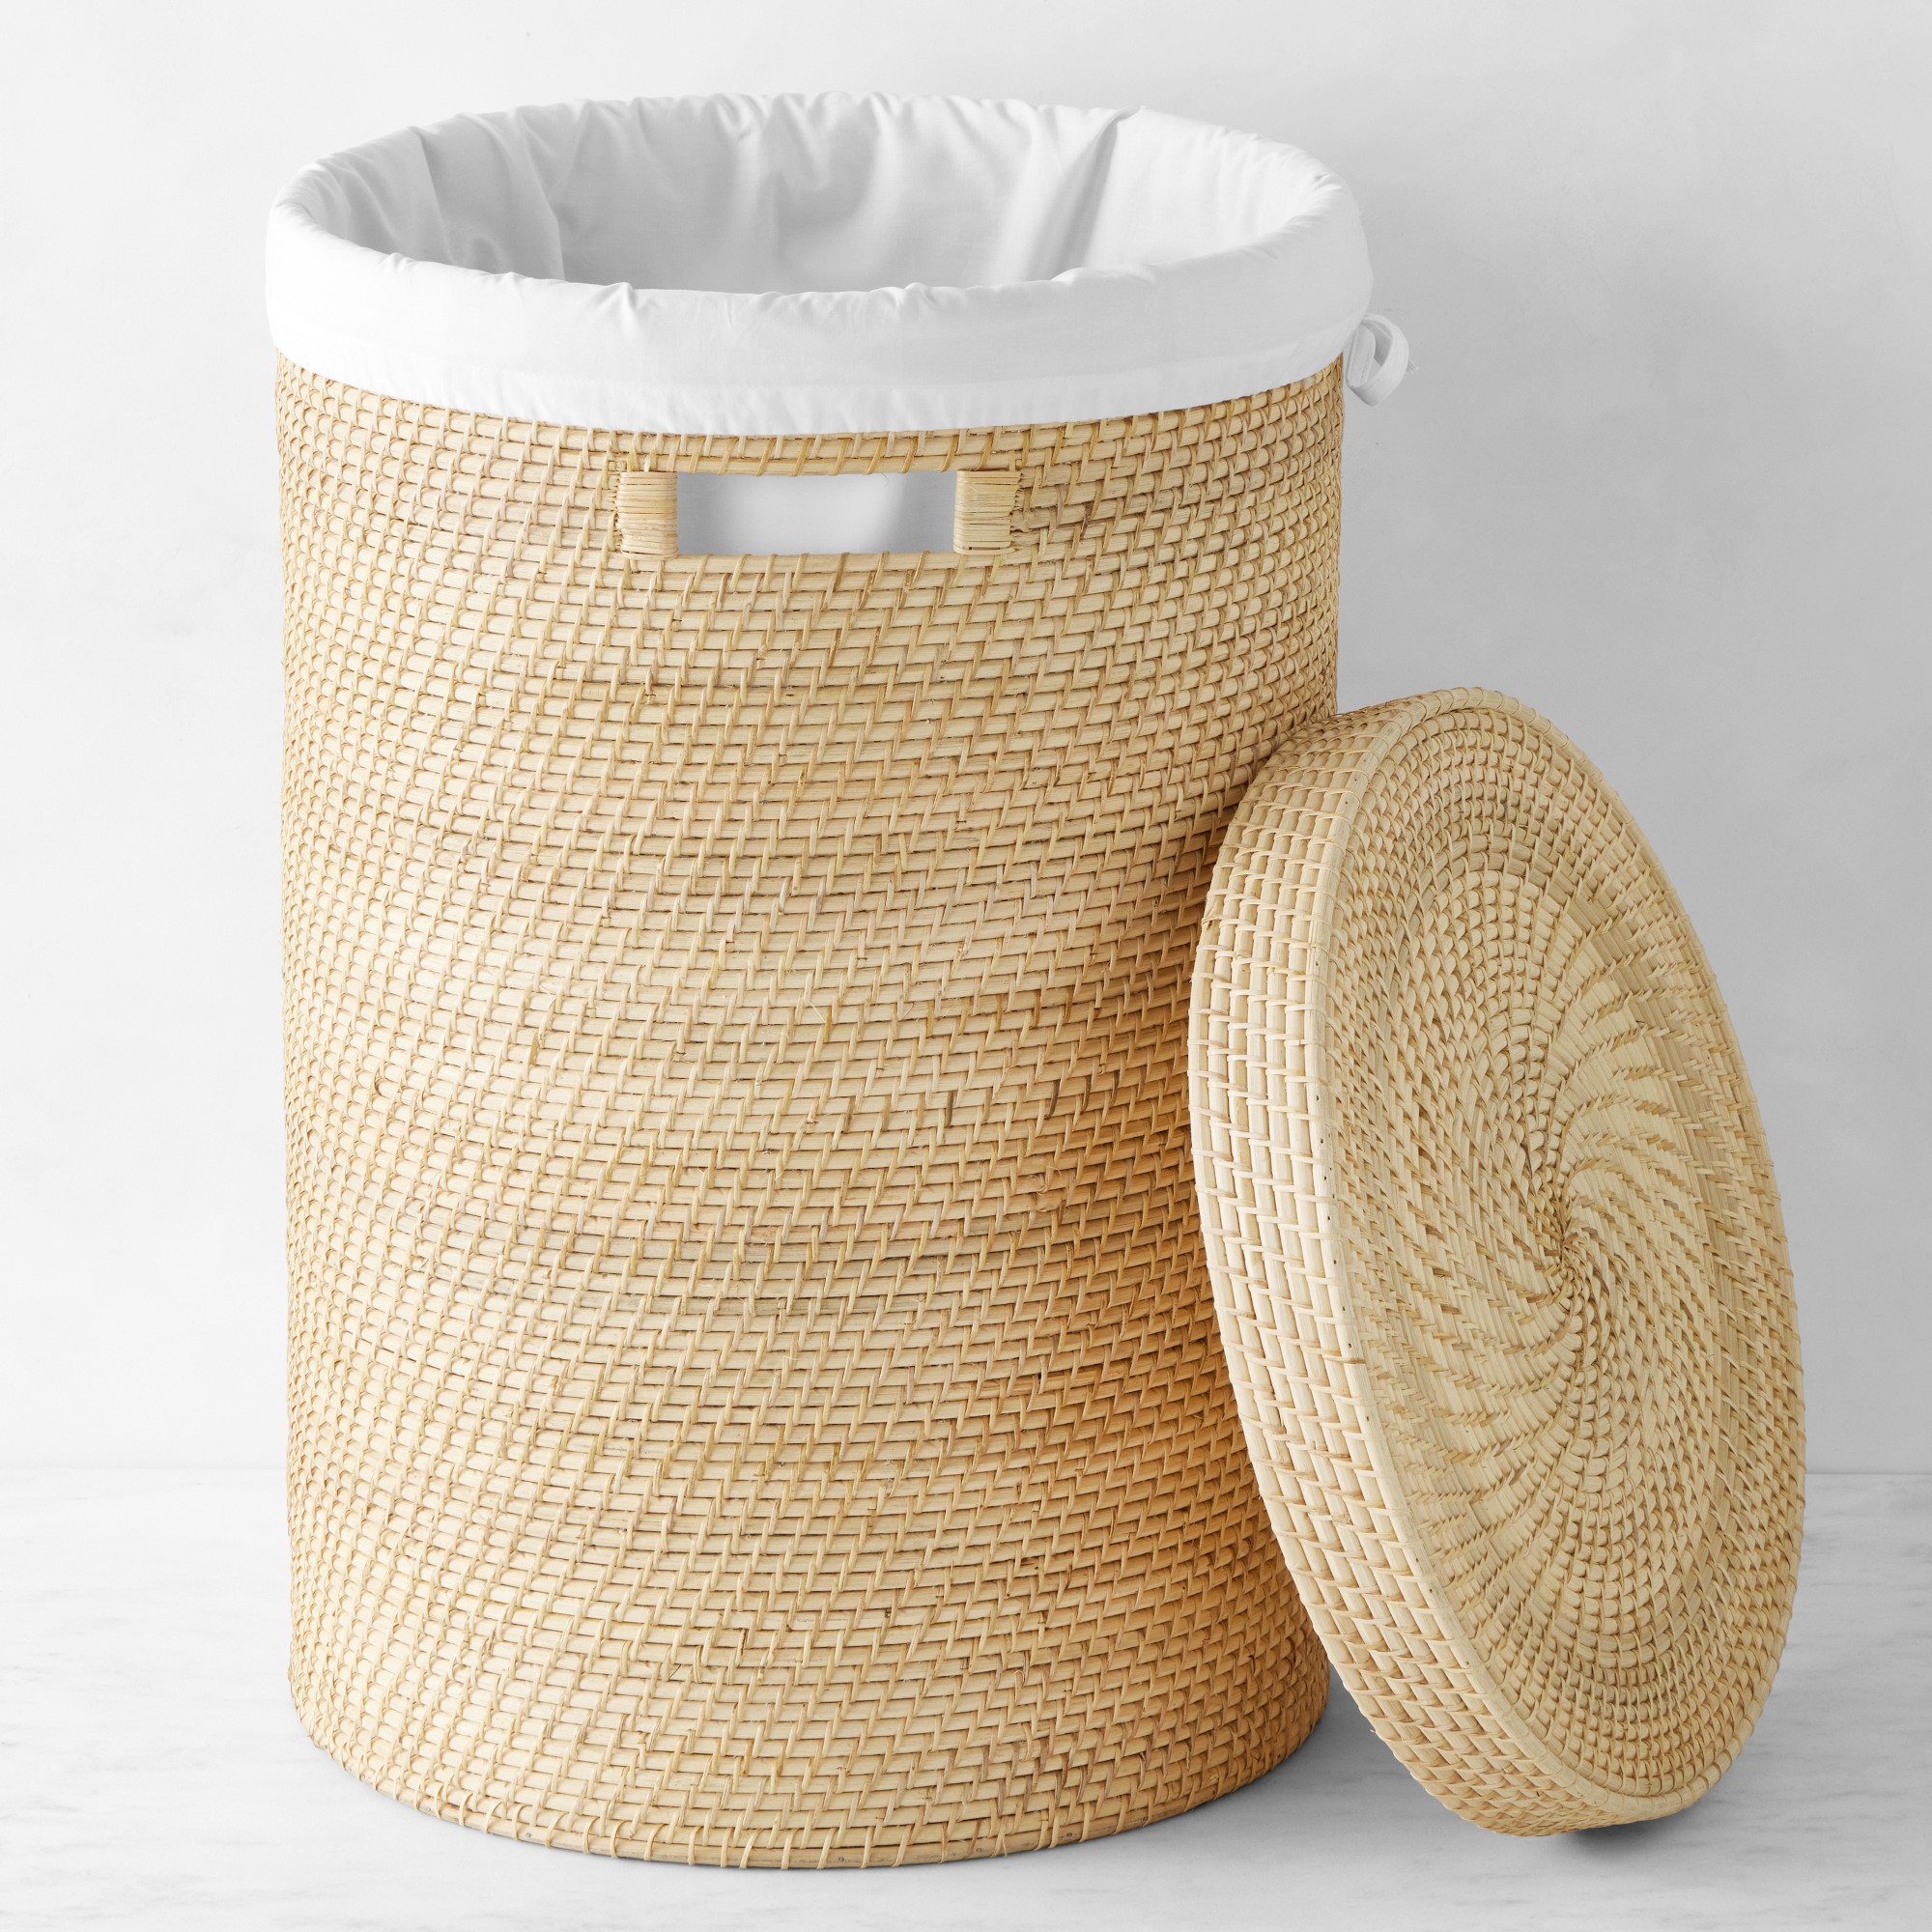 Hold Everything Rattan Laundry Baskets